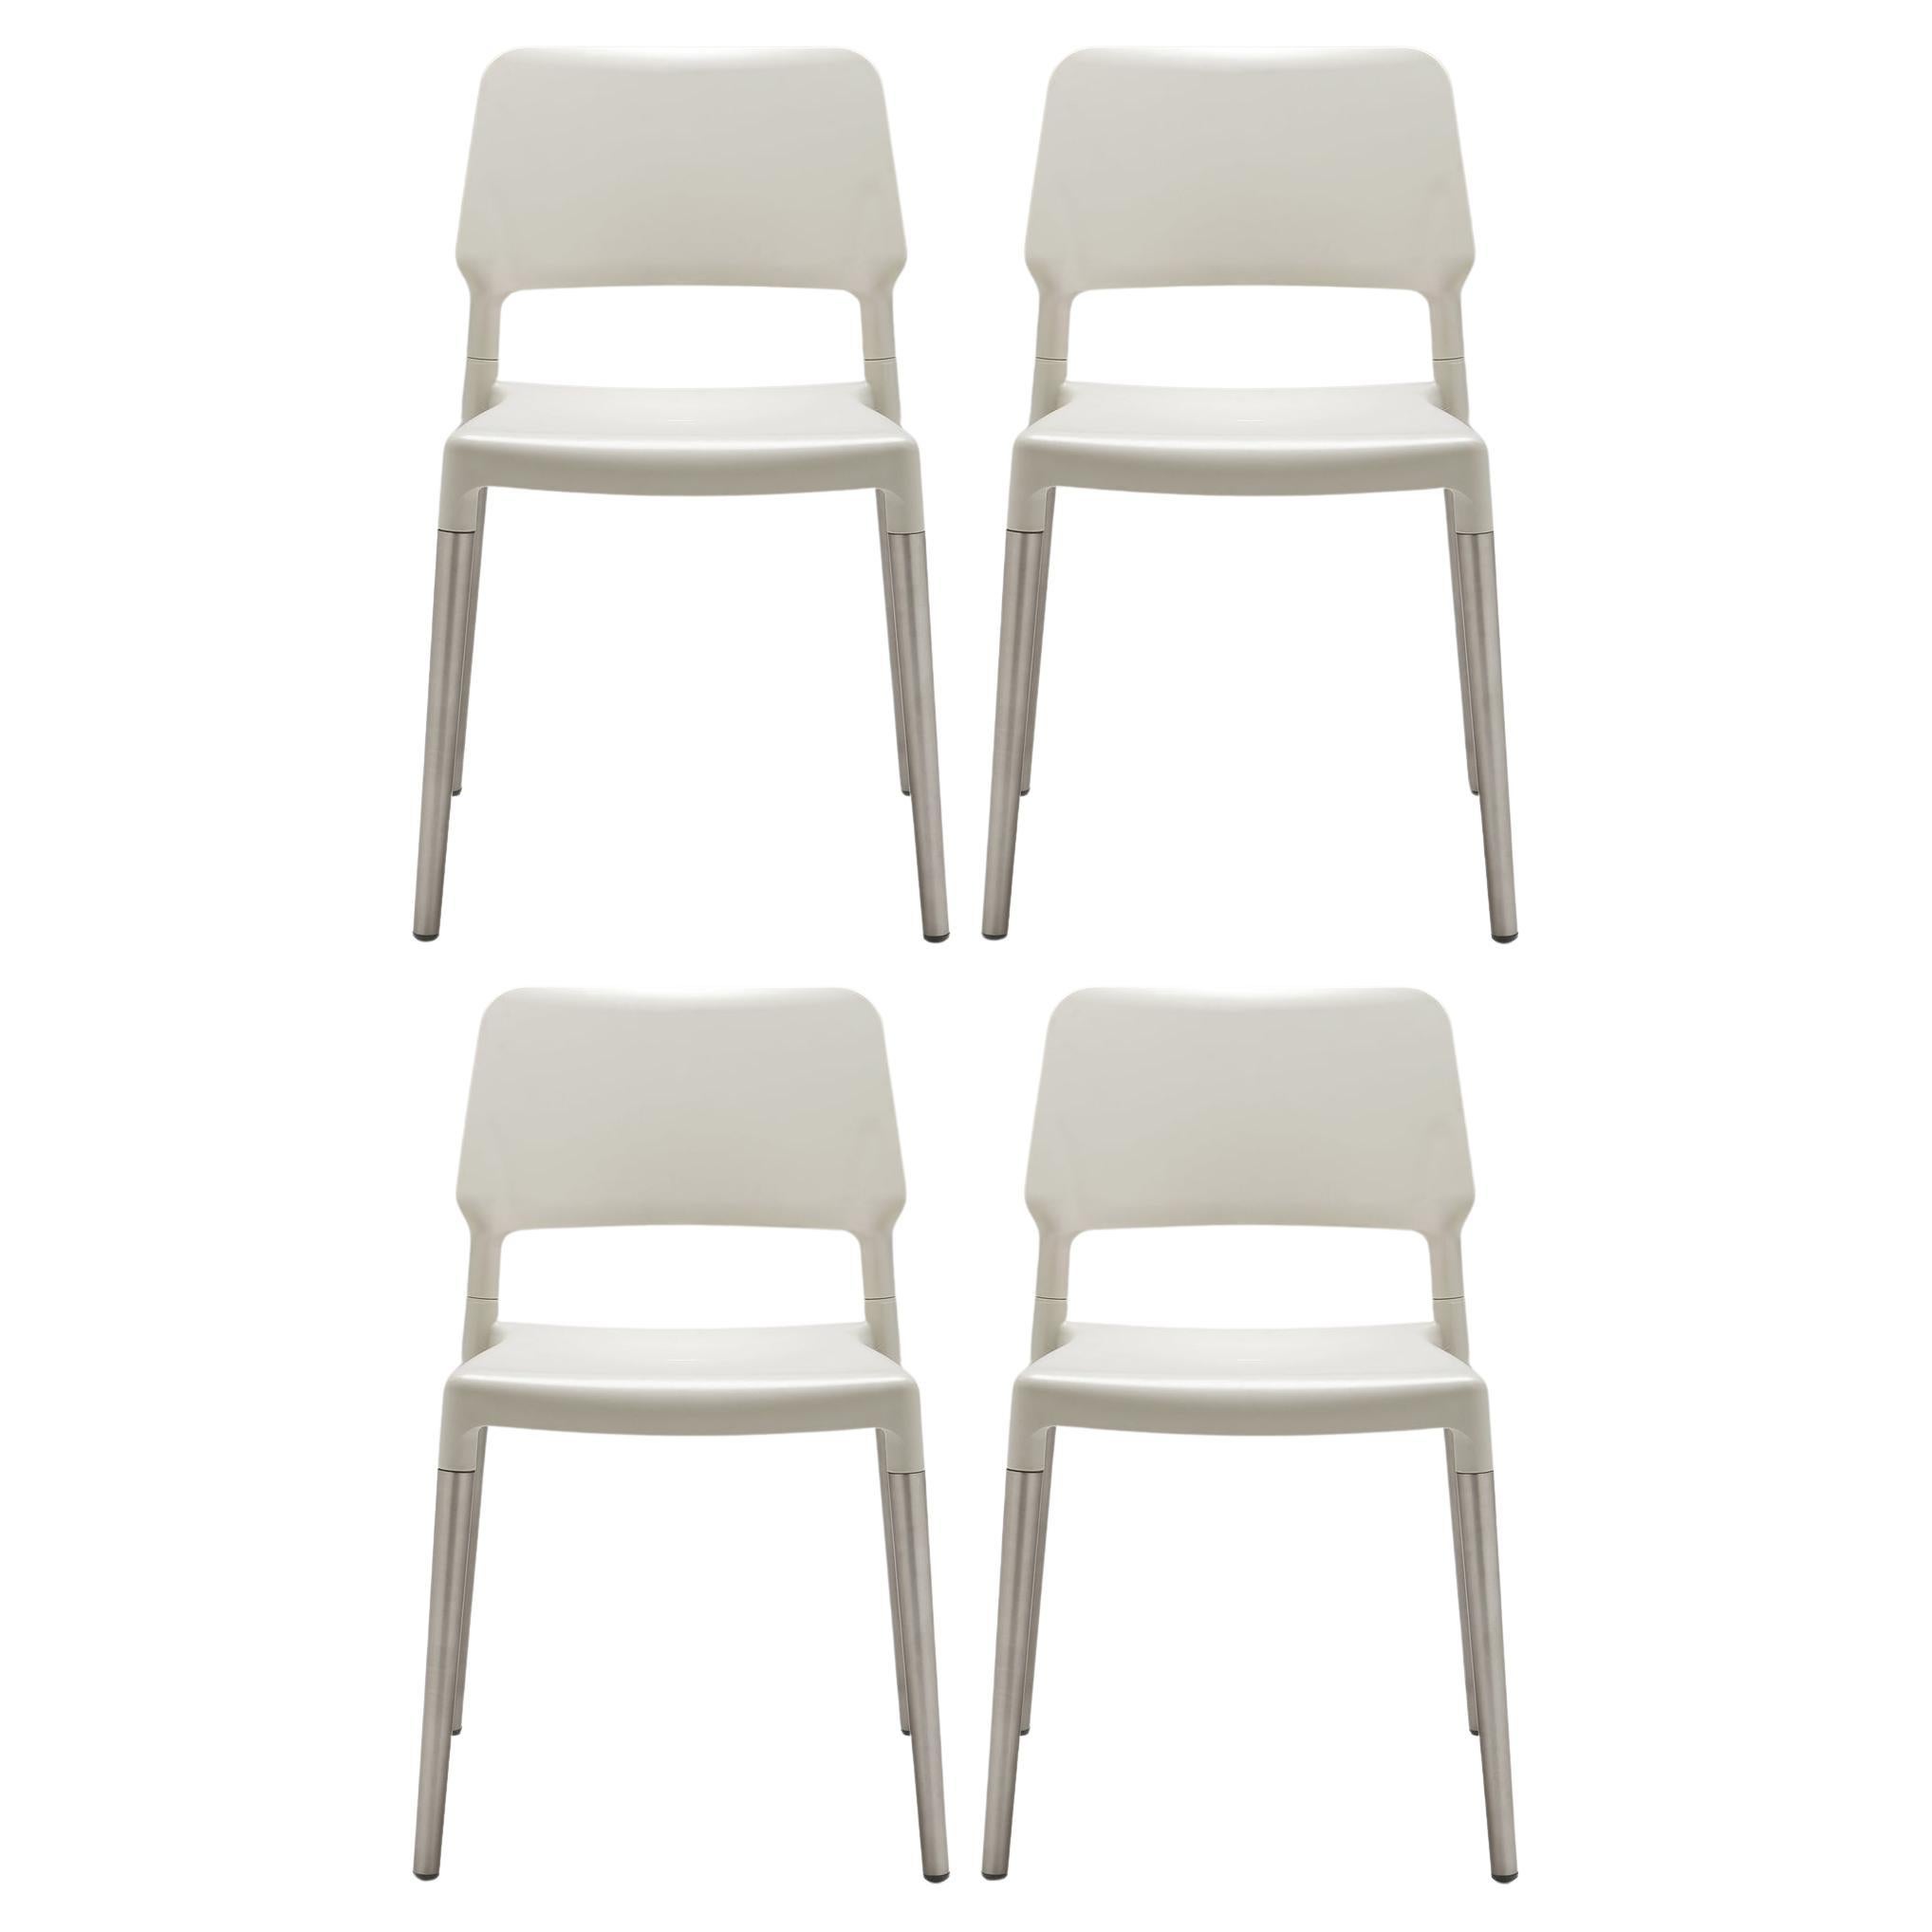 Set of 4 Aluminum Belloch Dining Chair by Lagranja Design